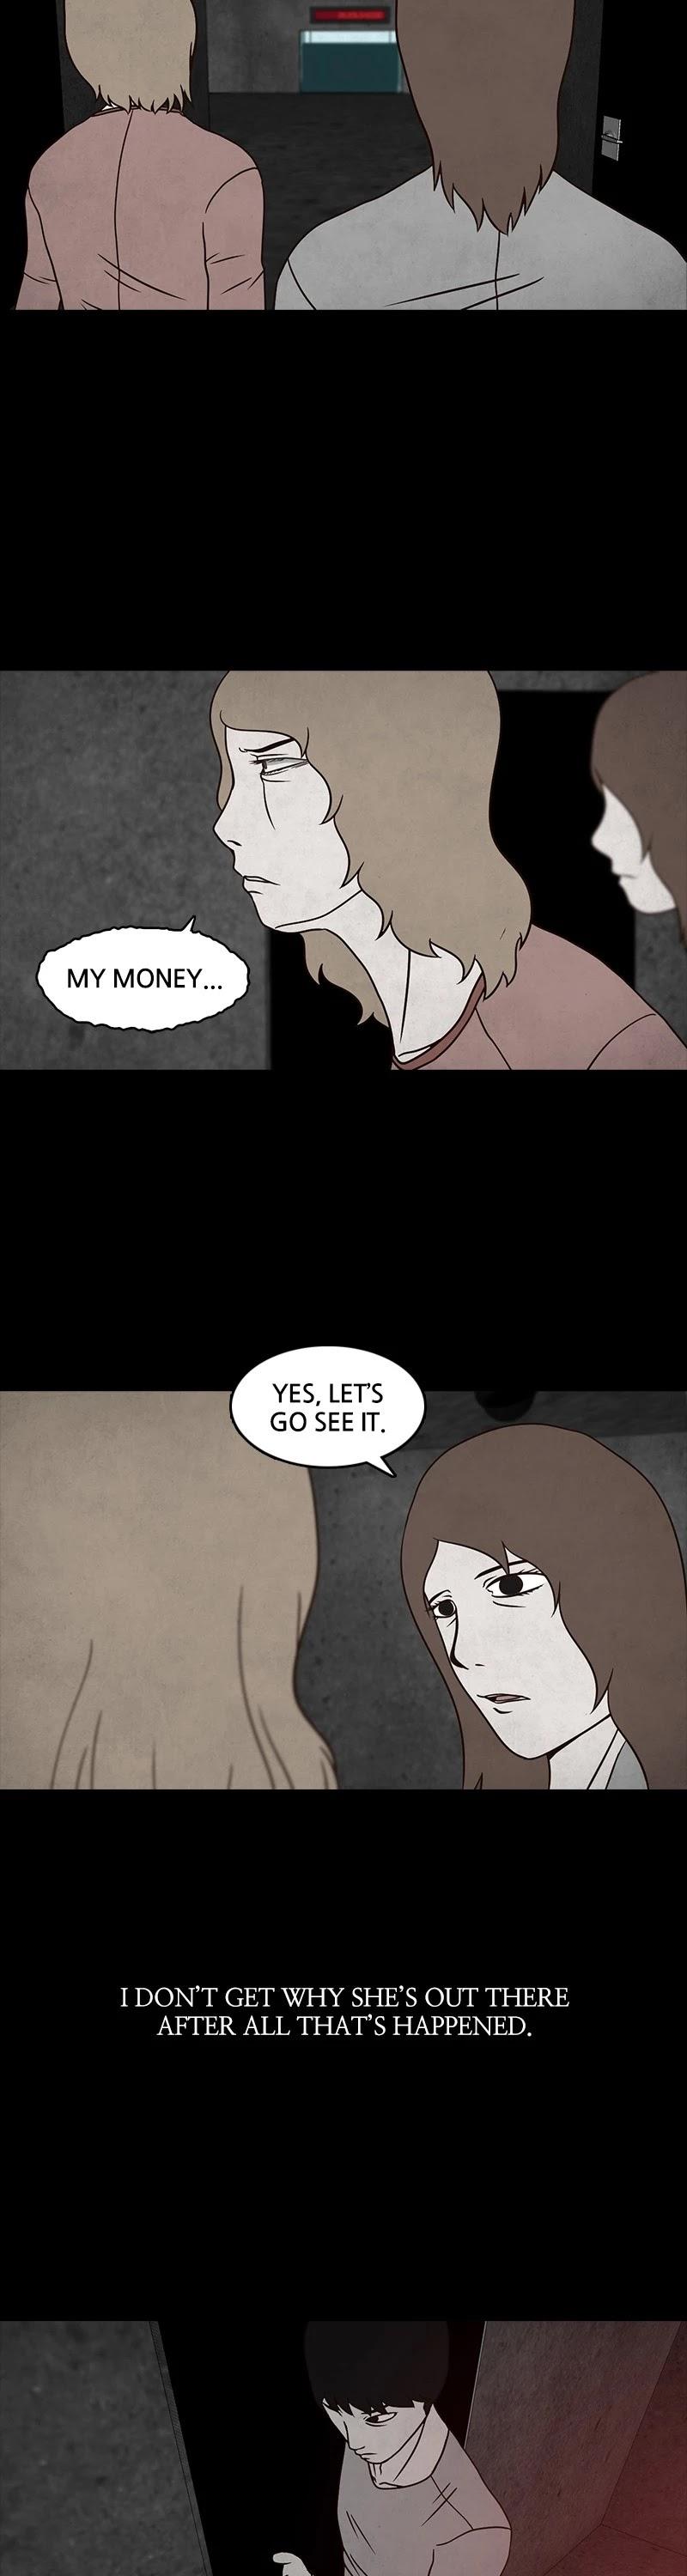 Read Money Game Money Game Chapter 29 : Episode 29 12